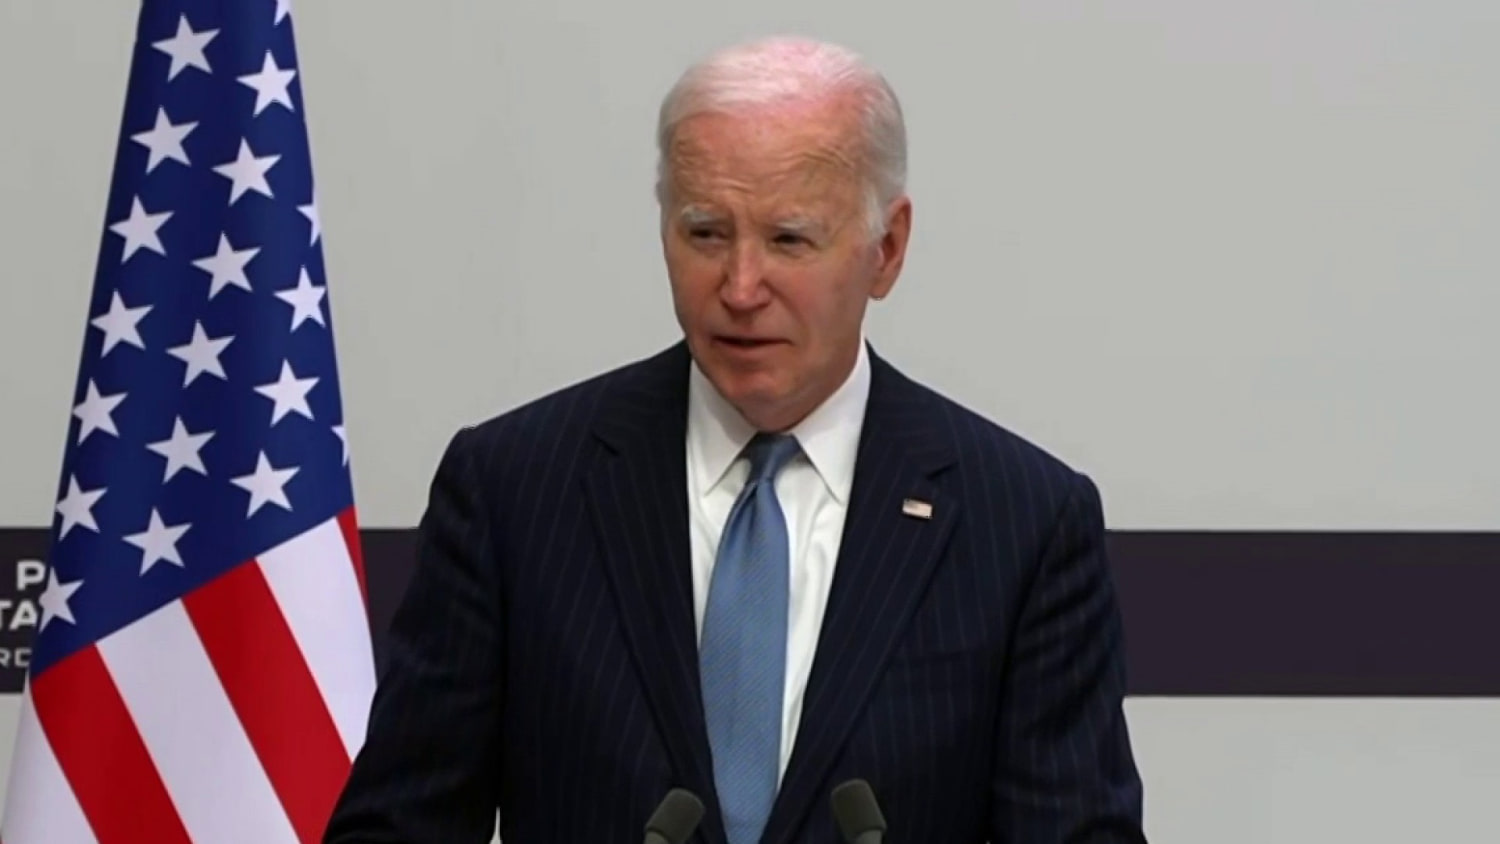 Biden welcomes hostage rescue by pushing ceasefire